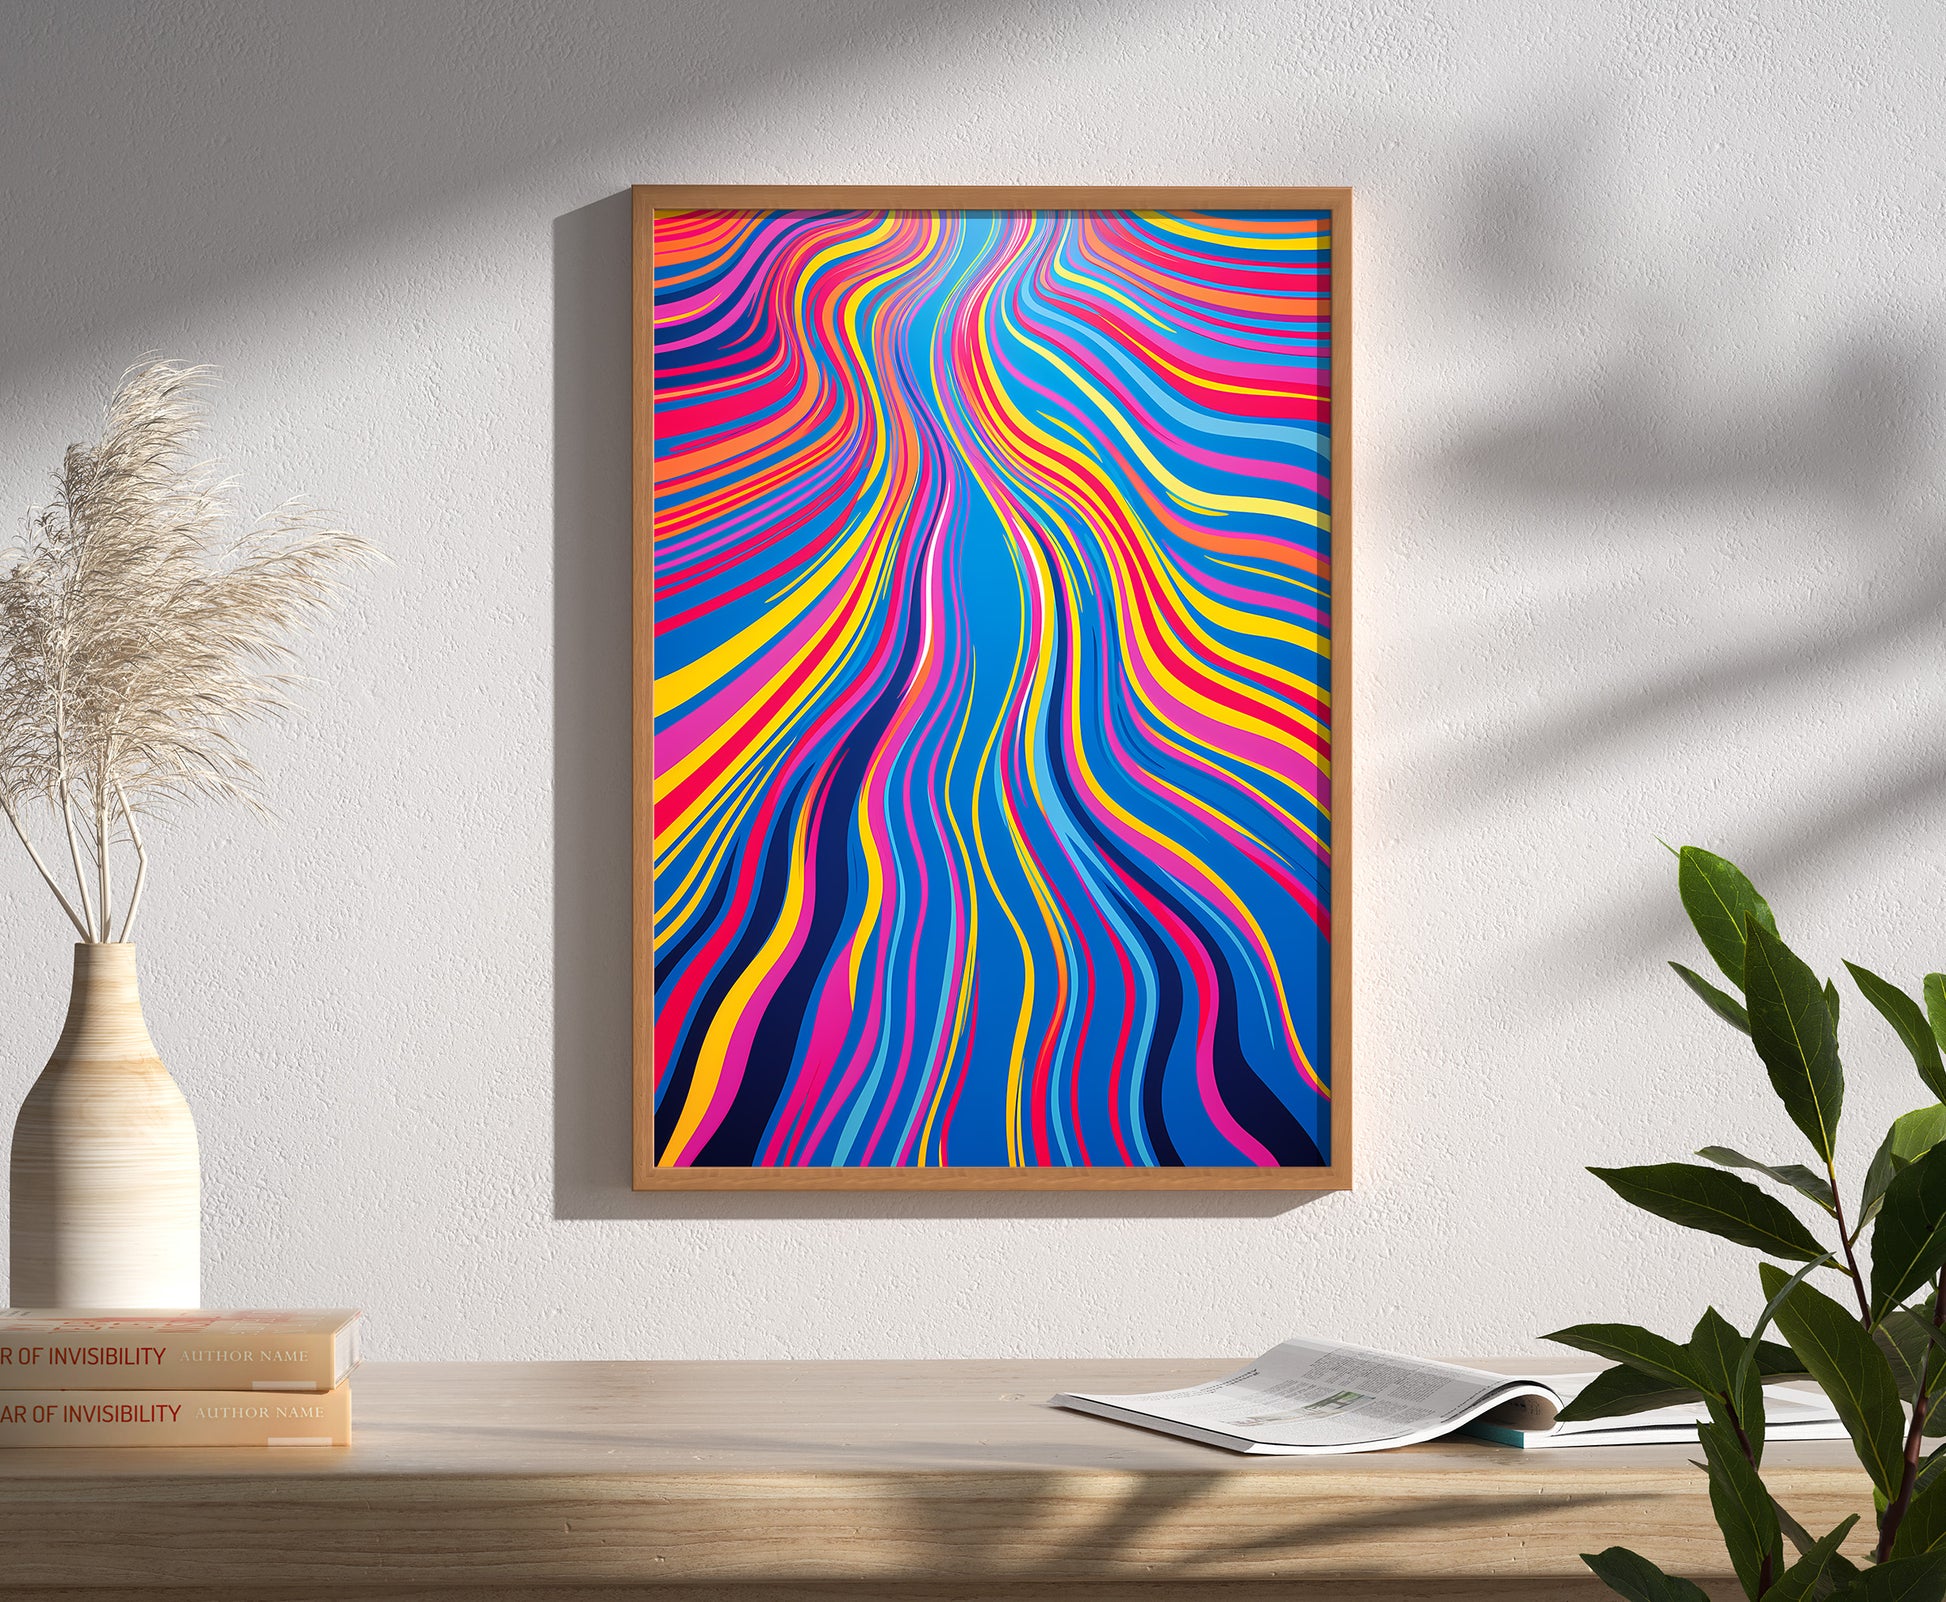 A colorful wavy abstract painting hanging on a wall in a bright room with a vase and plant.